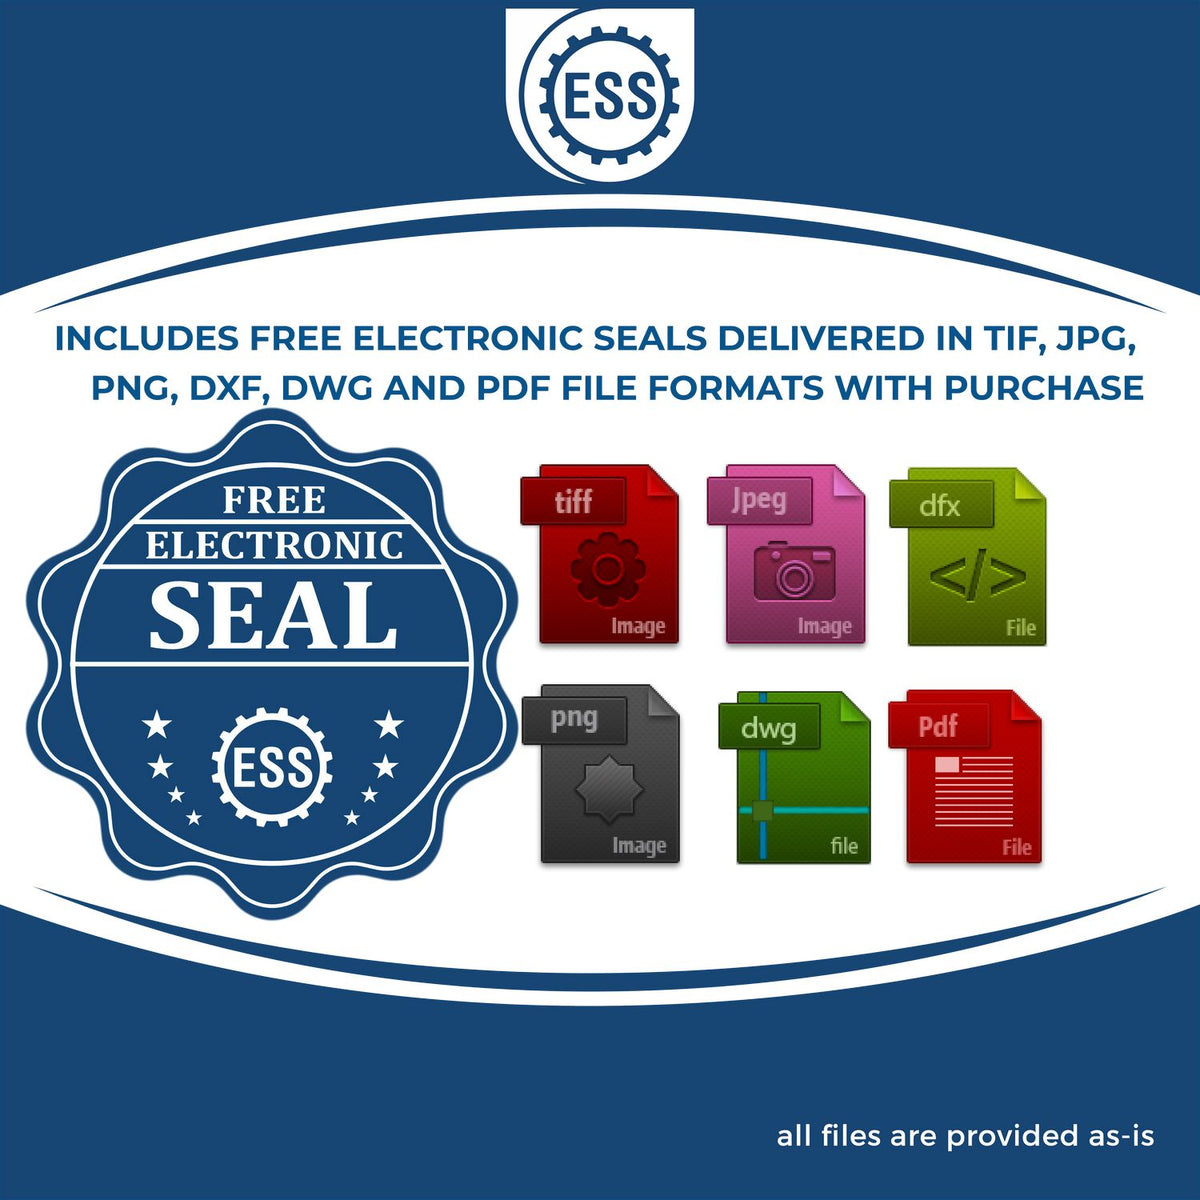 An infographic for the free electronic seal for the Long Reach Nebraska PE Seal illustrating the different file type icons such as DXF, DWG, TIF, JPG and PNG.